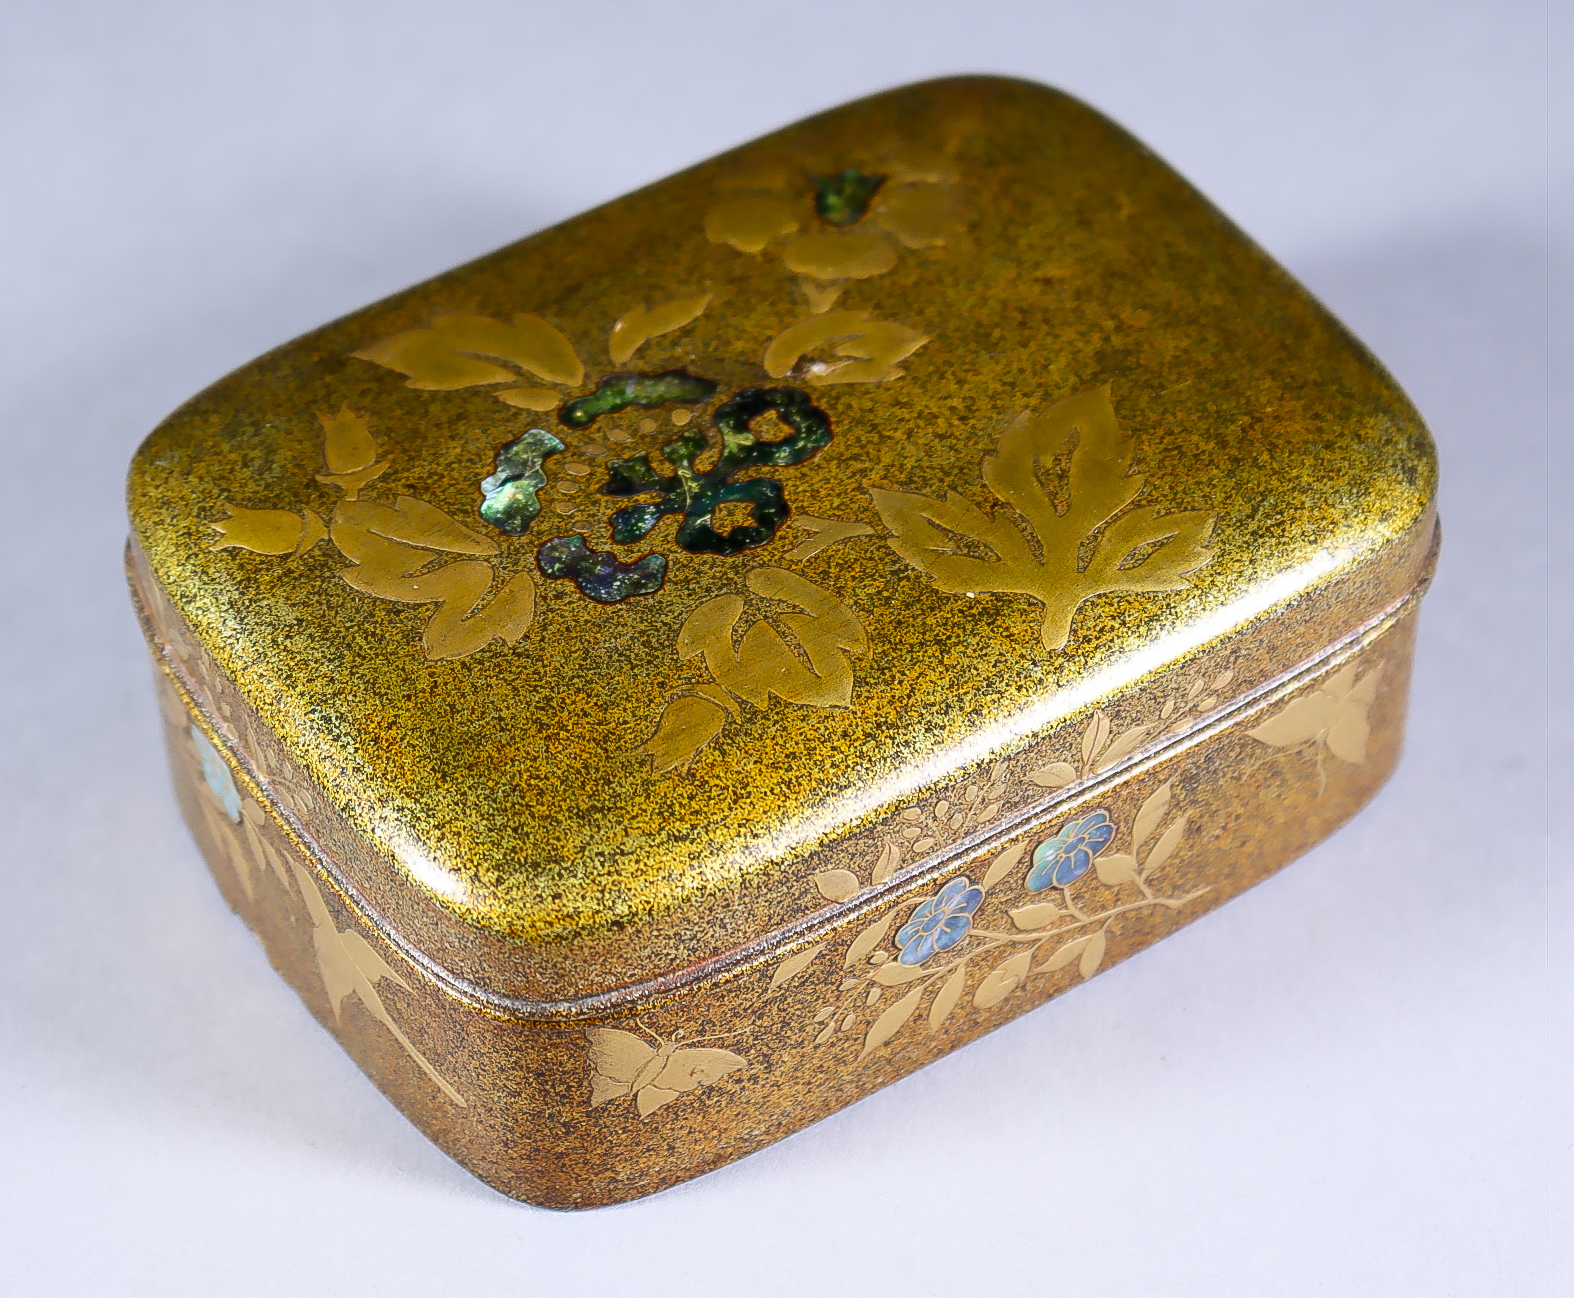 A Japanese Gold Nashiji Lacquer Incense Box, Taisho Period, the cover and sides decorated in high